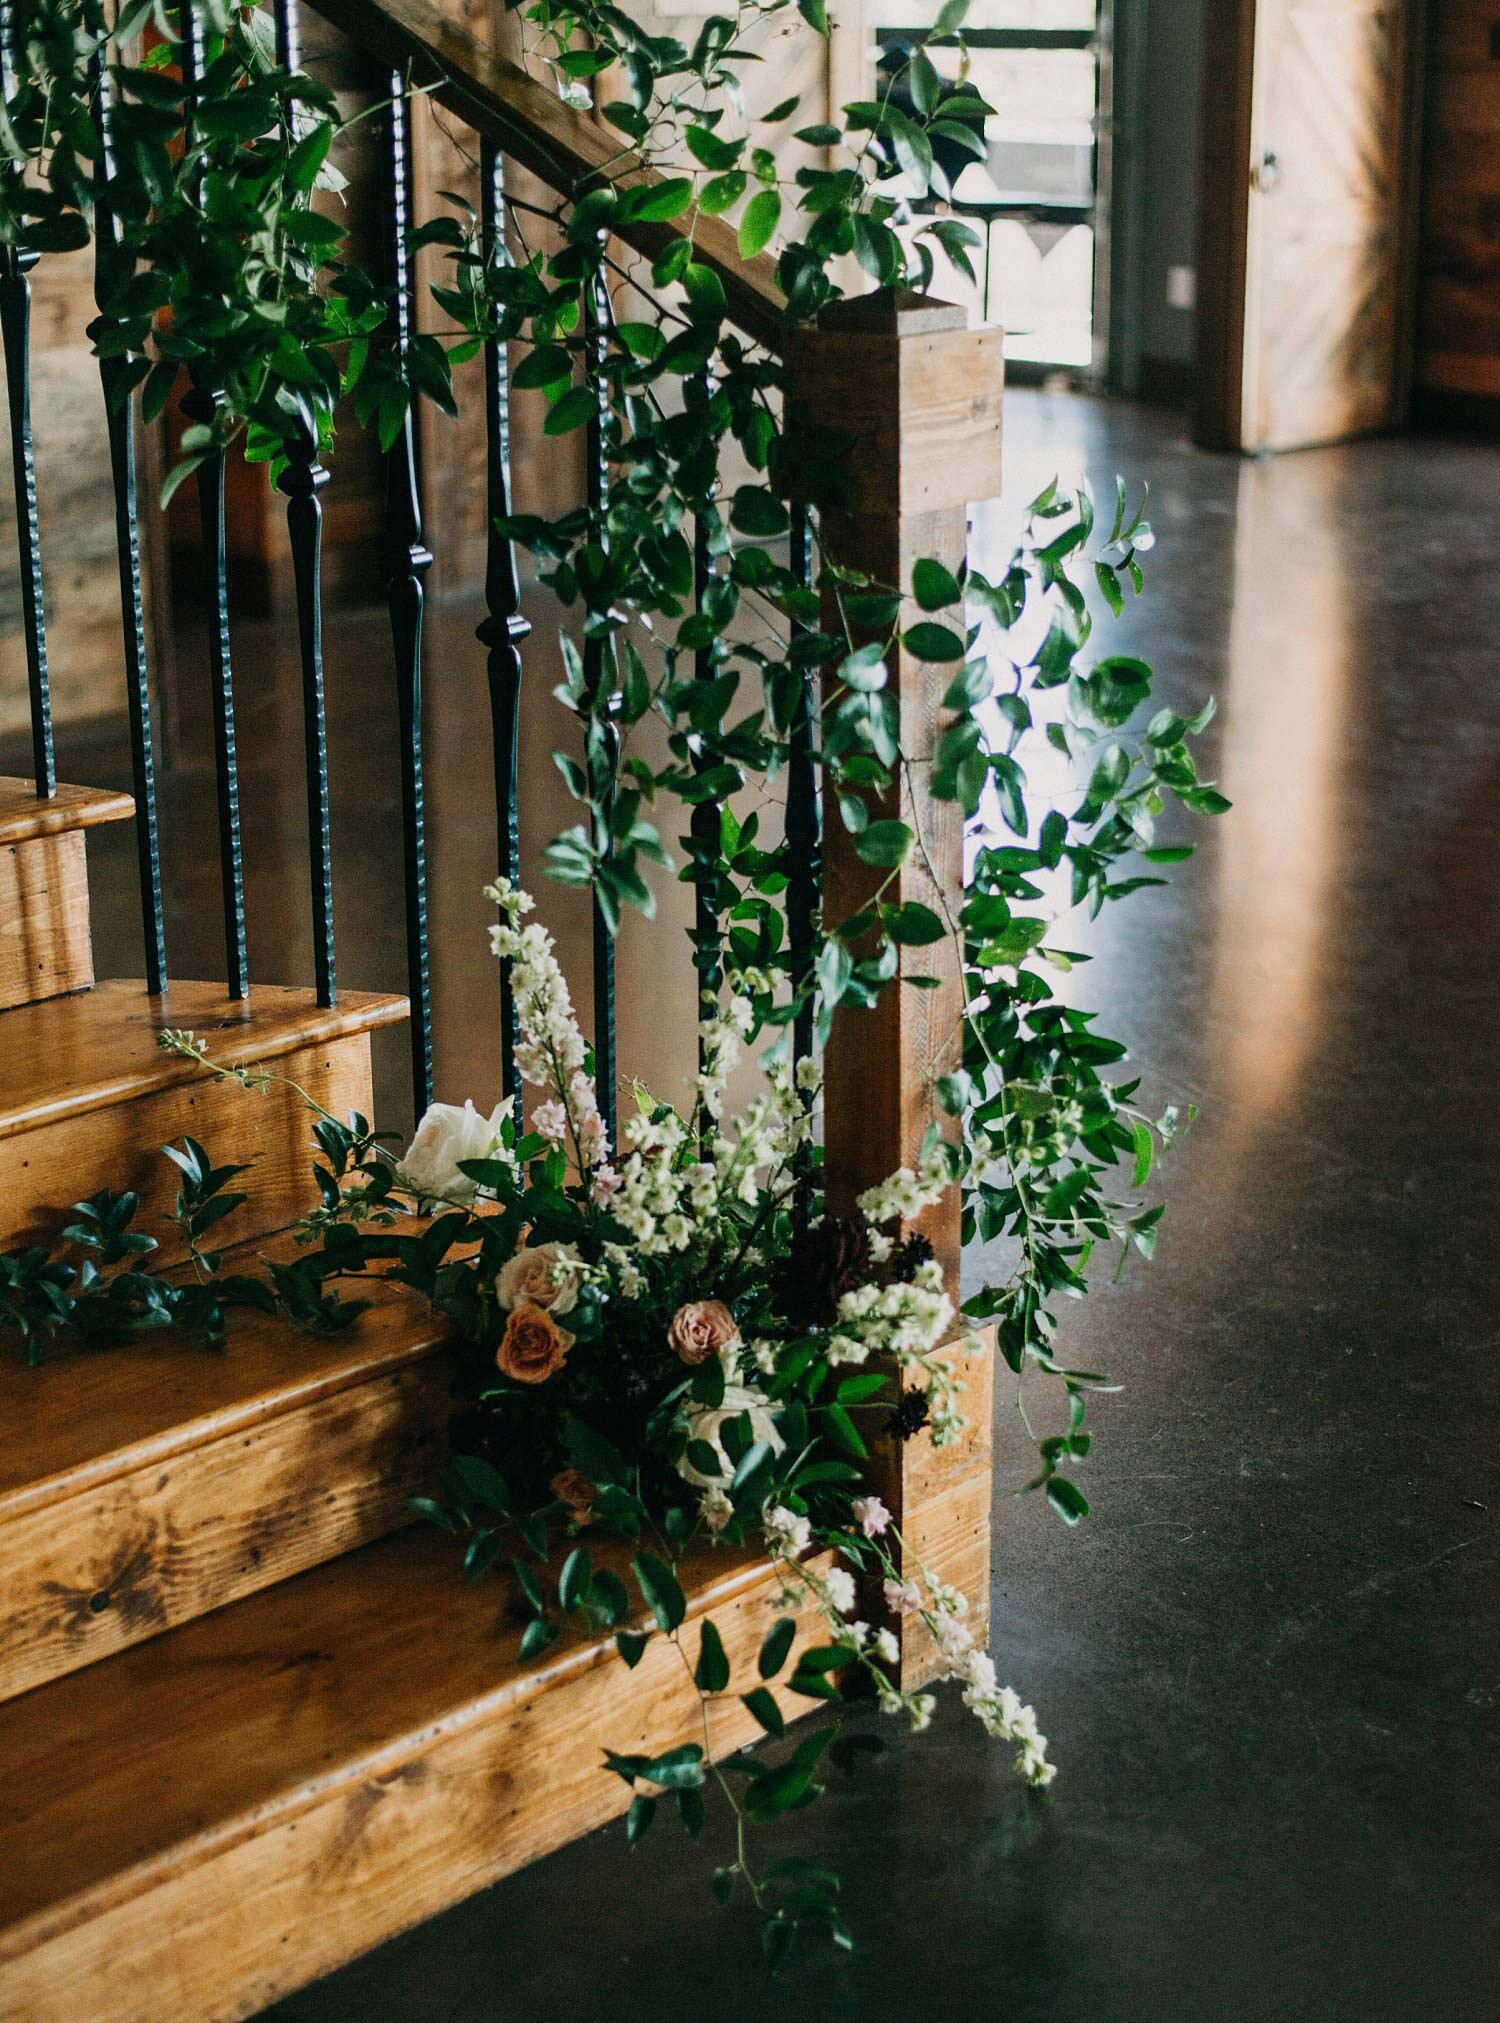 Greenery and flower install at the base of wood stairs